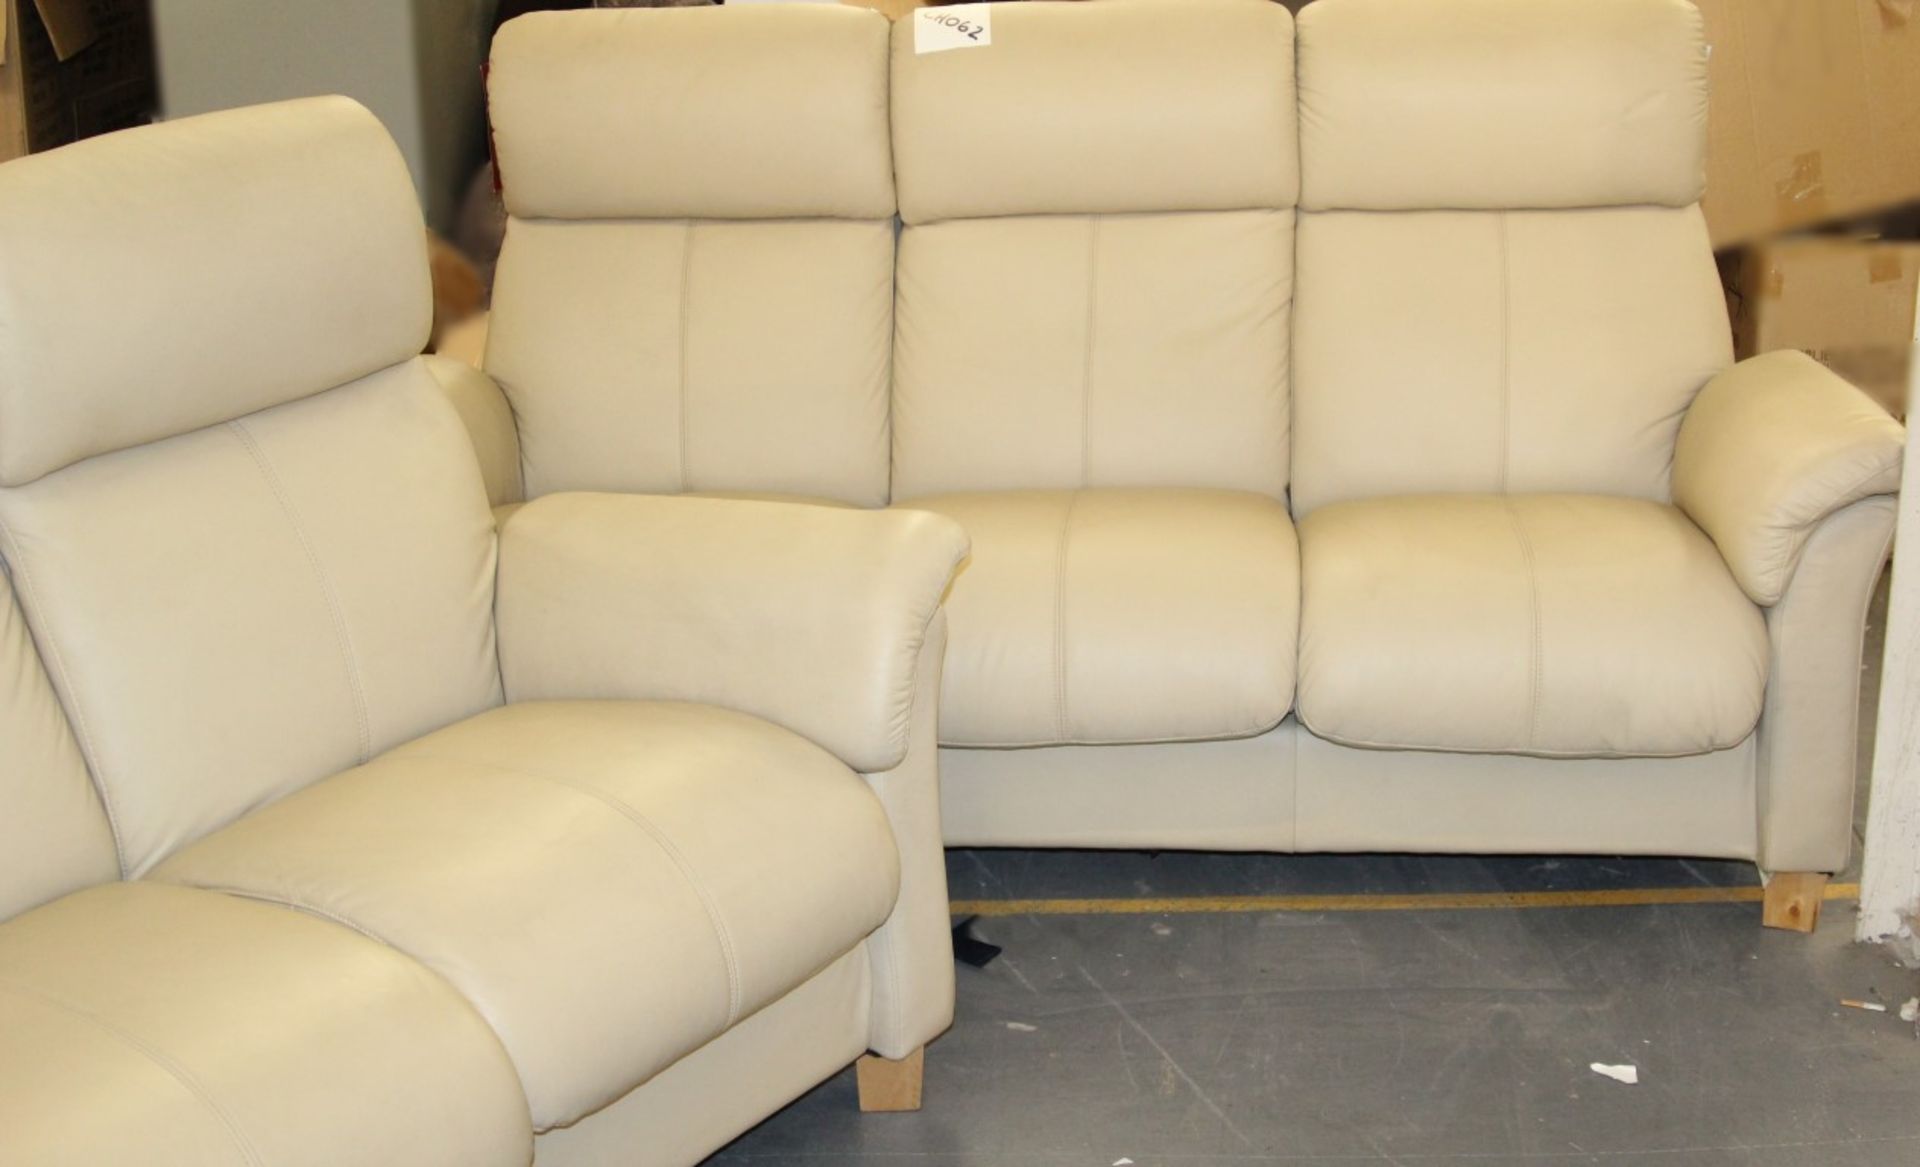 Ralaxateese Beige Leather Recliner 3 + 2 Seater Set - Ref CH062 – RRP £3,600 - Ex Display Stock In - Image 2 of 3